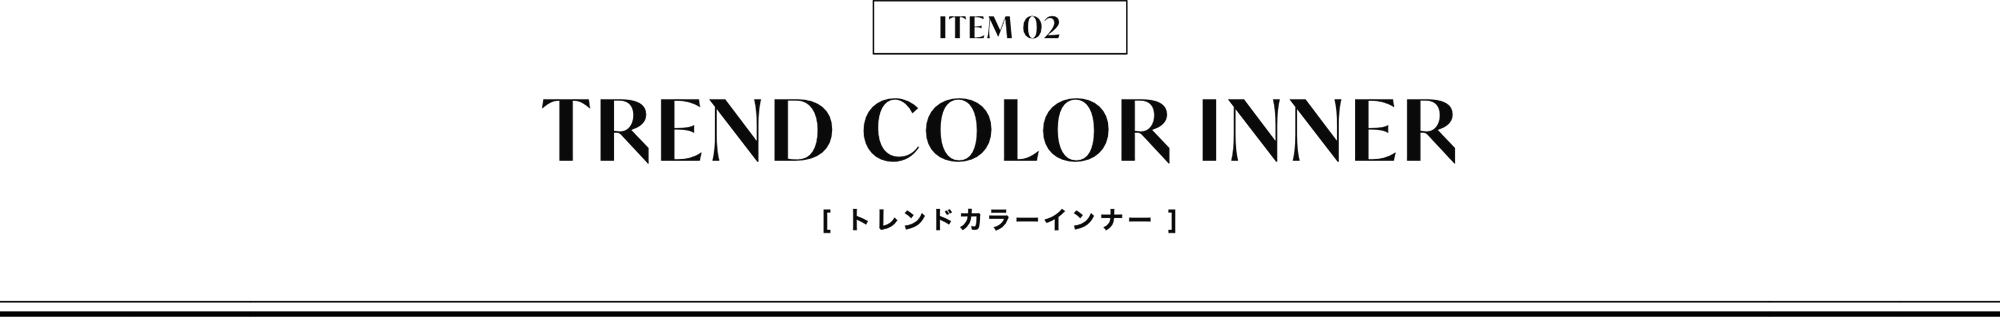 TREND COLOR INNER